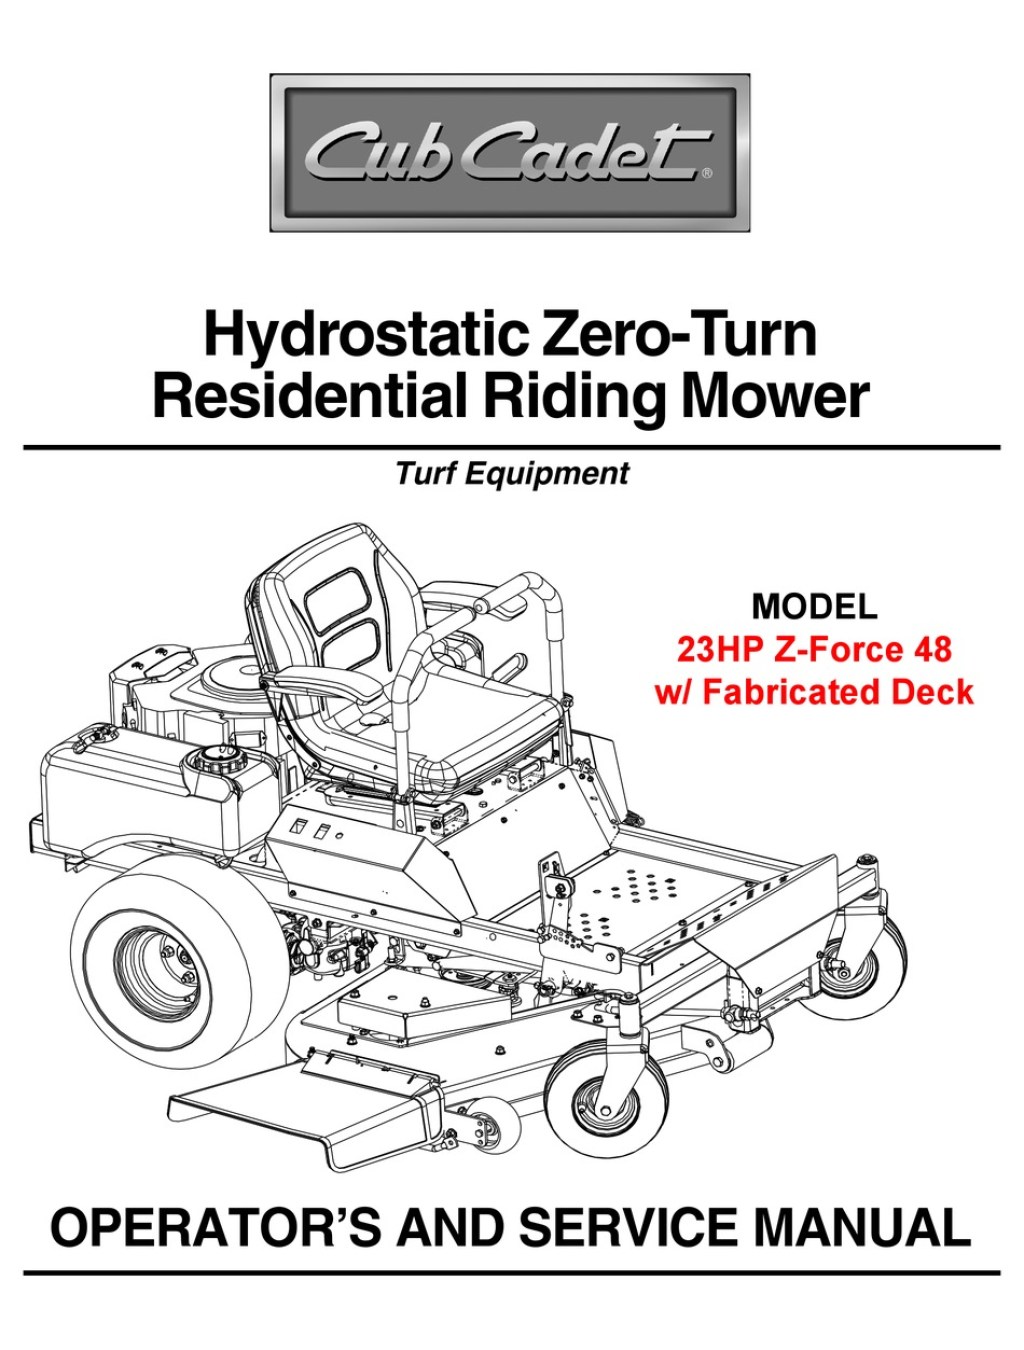 Picture of: CUB CADET HP Z-FORCE  OPERATOR’S AND SERVICE MANUAL Pdf